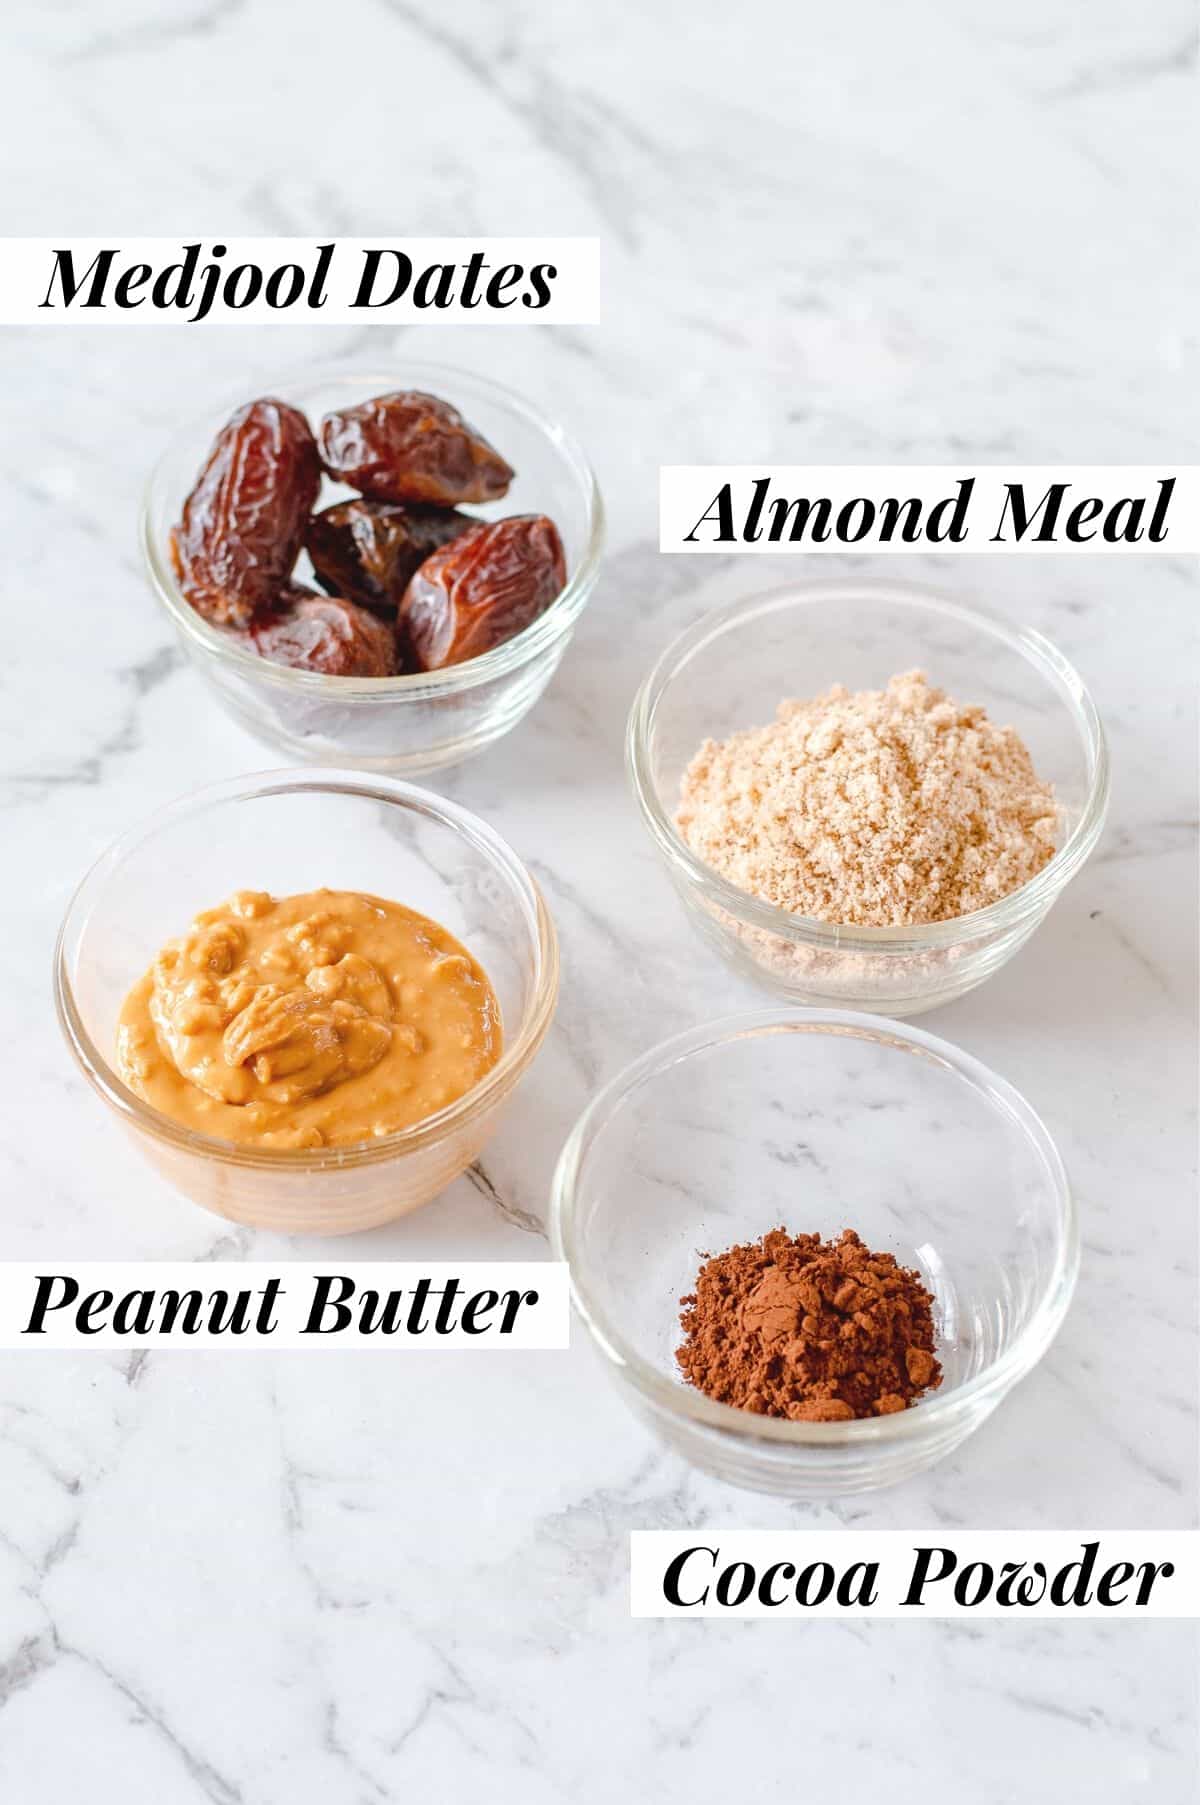 An image of dates, peanut butter, almond meal and cocoa powder in glass bowls on marble background.